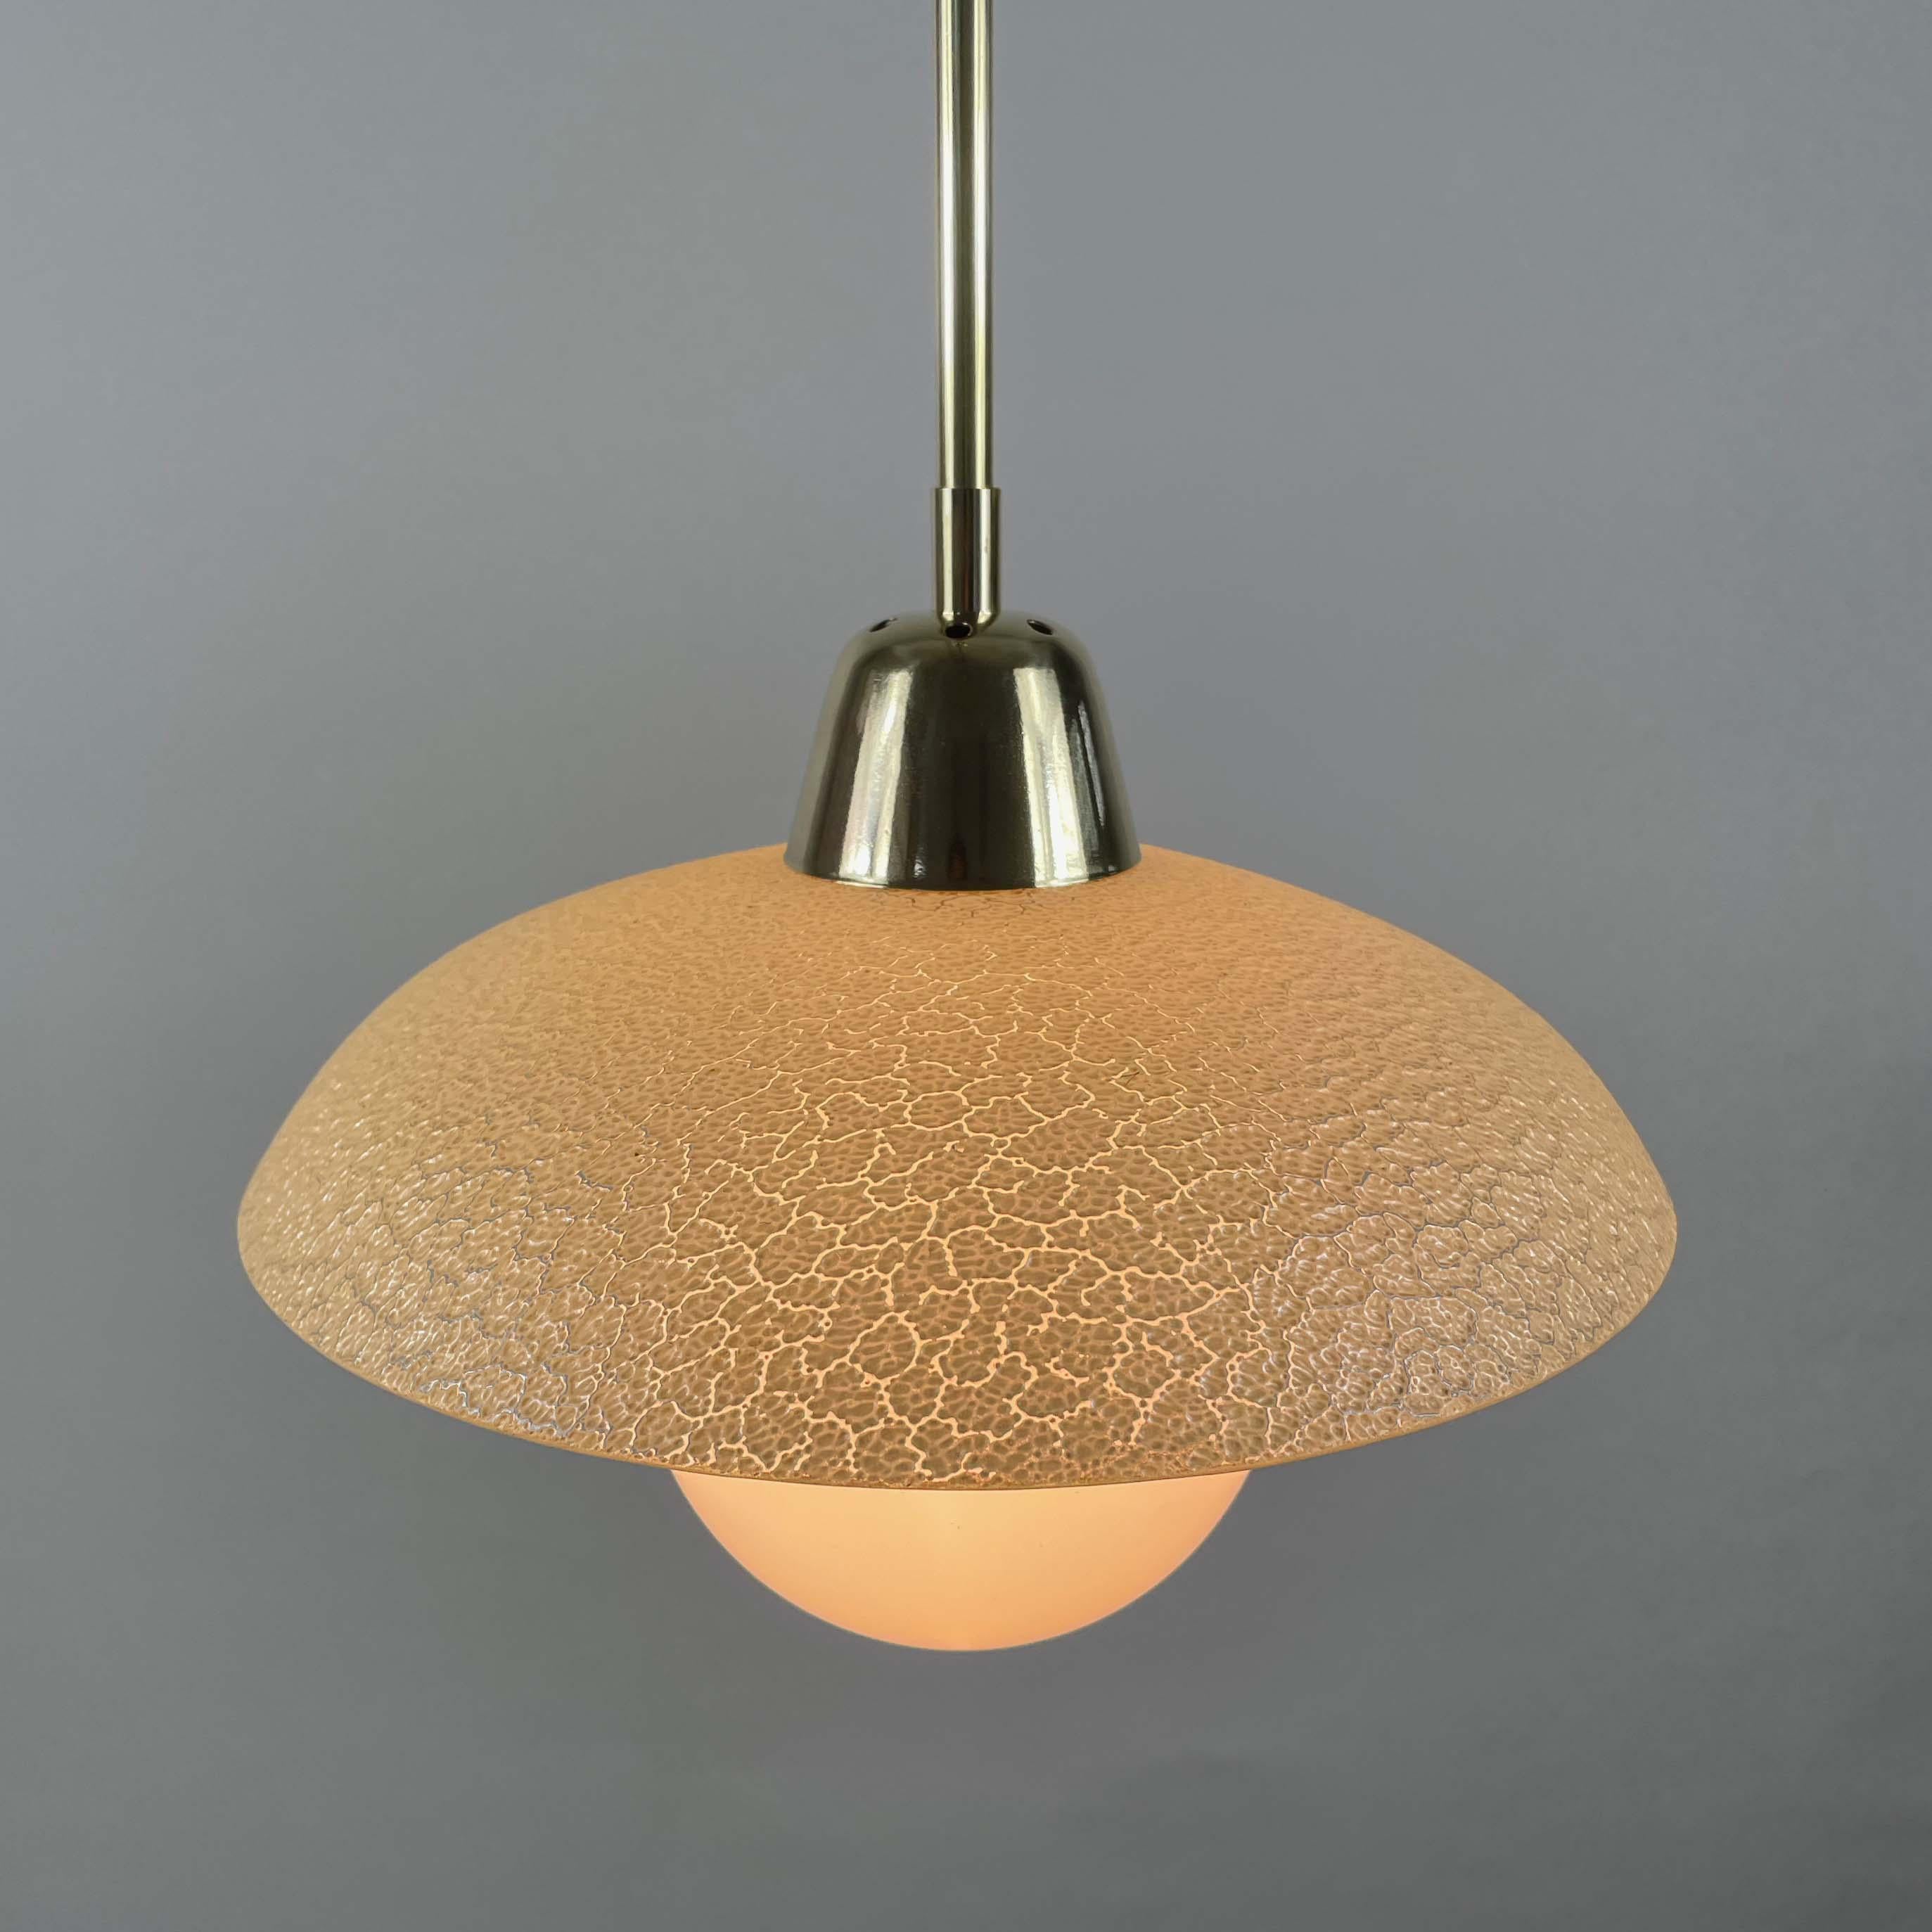 Cream Textured Glass and Brass Pendants, Sweden 1940s to 1950s For Sale 1